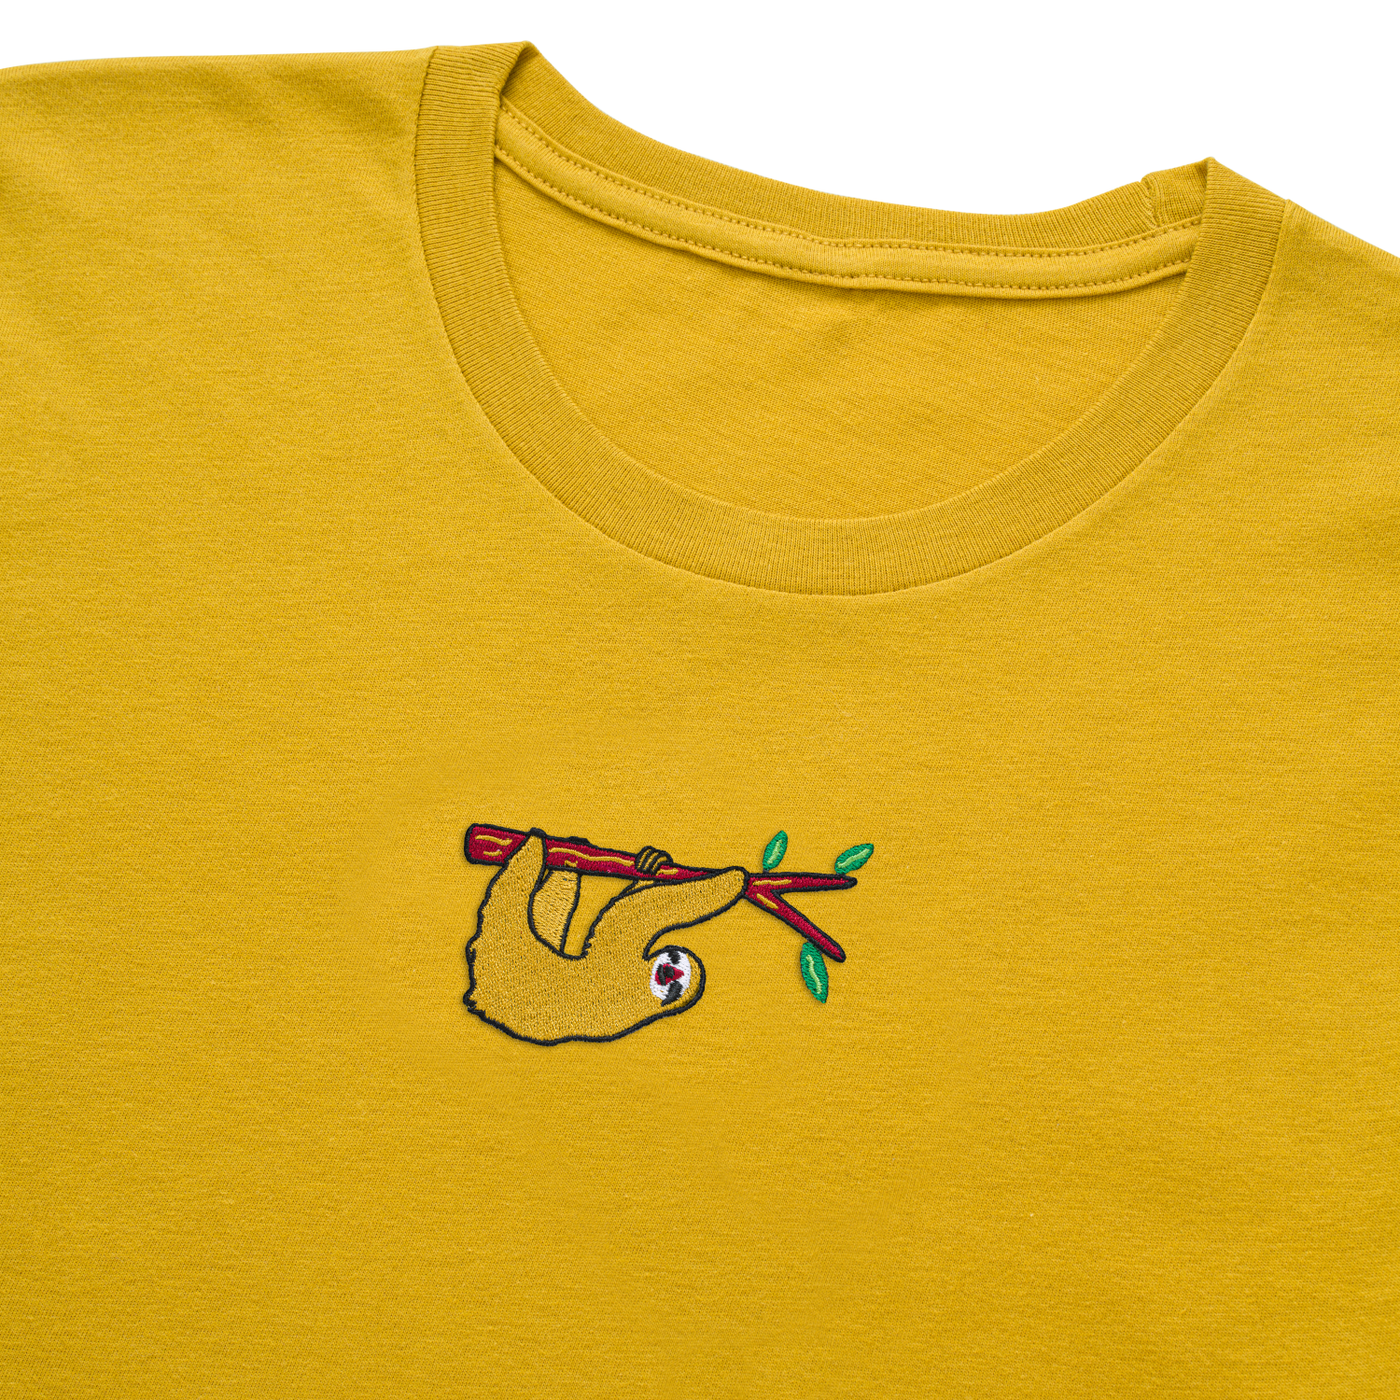 Bobby's Planet Women's Embroidered Sloth T-Shirt from South American Amazon Animals Collection in Mustard Color#color_mustard